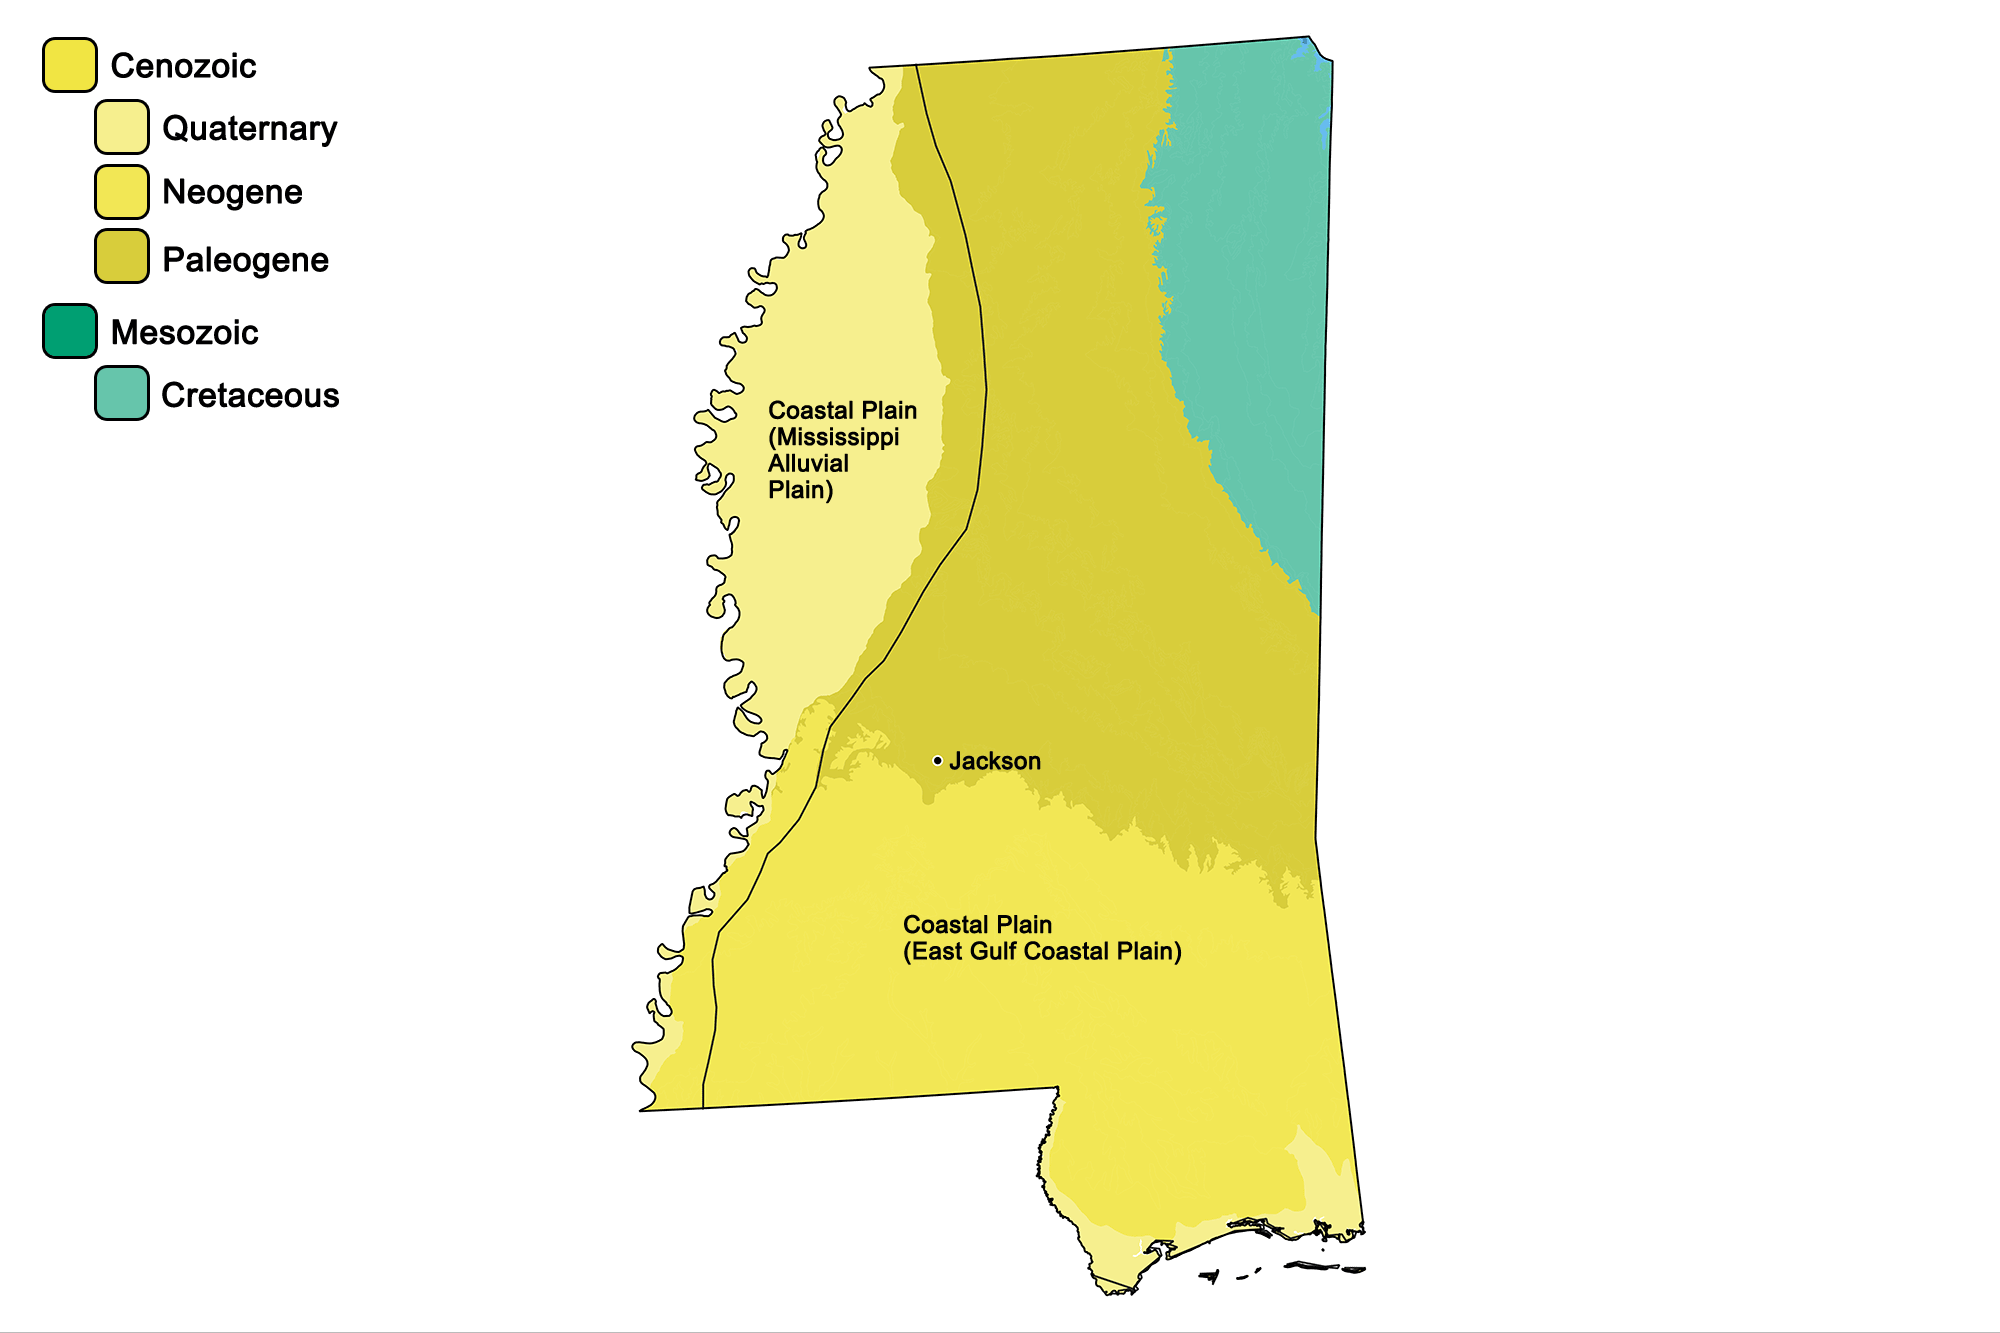 Geologic map of Mississippi with physiographic regions identified.